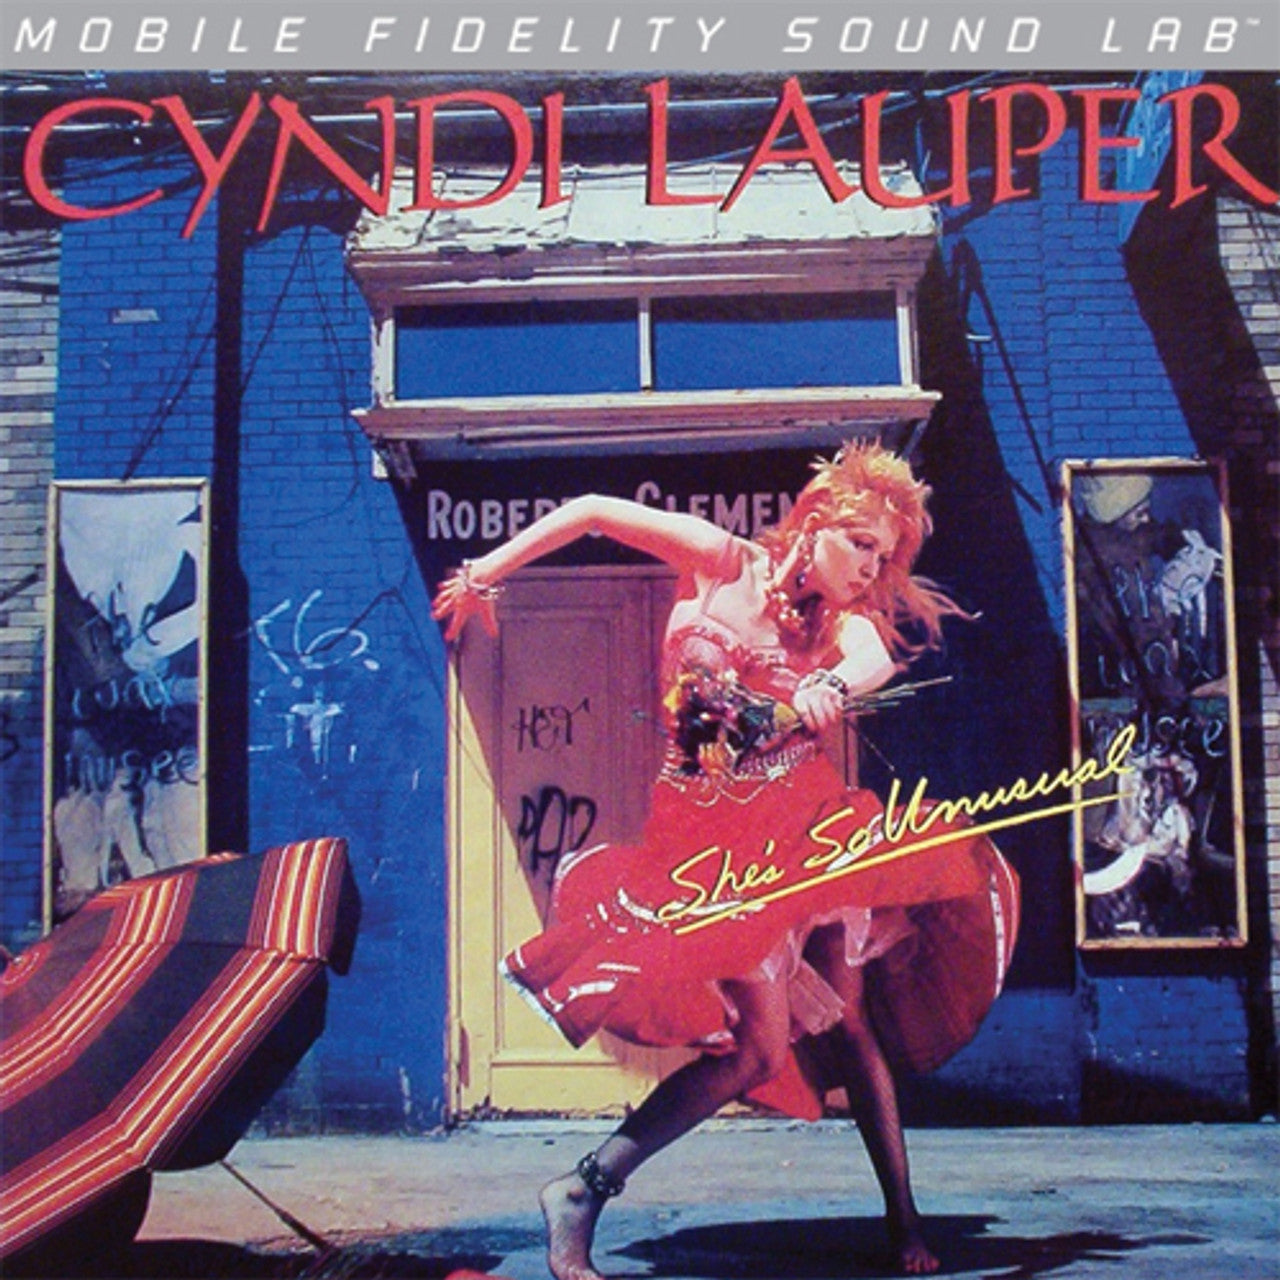 Cyndi Lauper - She's So Unusual [LP] (Audiophile Vinyl, limited/numbered) MOBILE FIDELITY